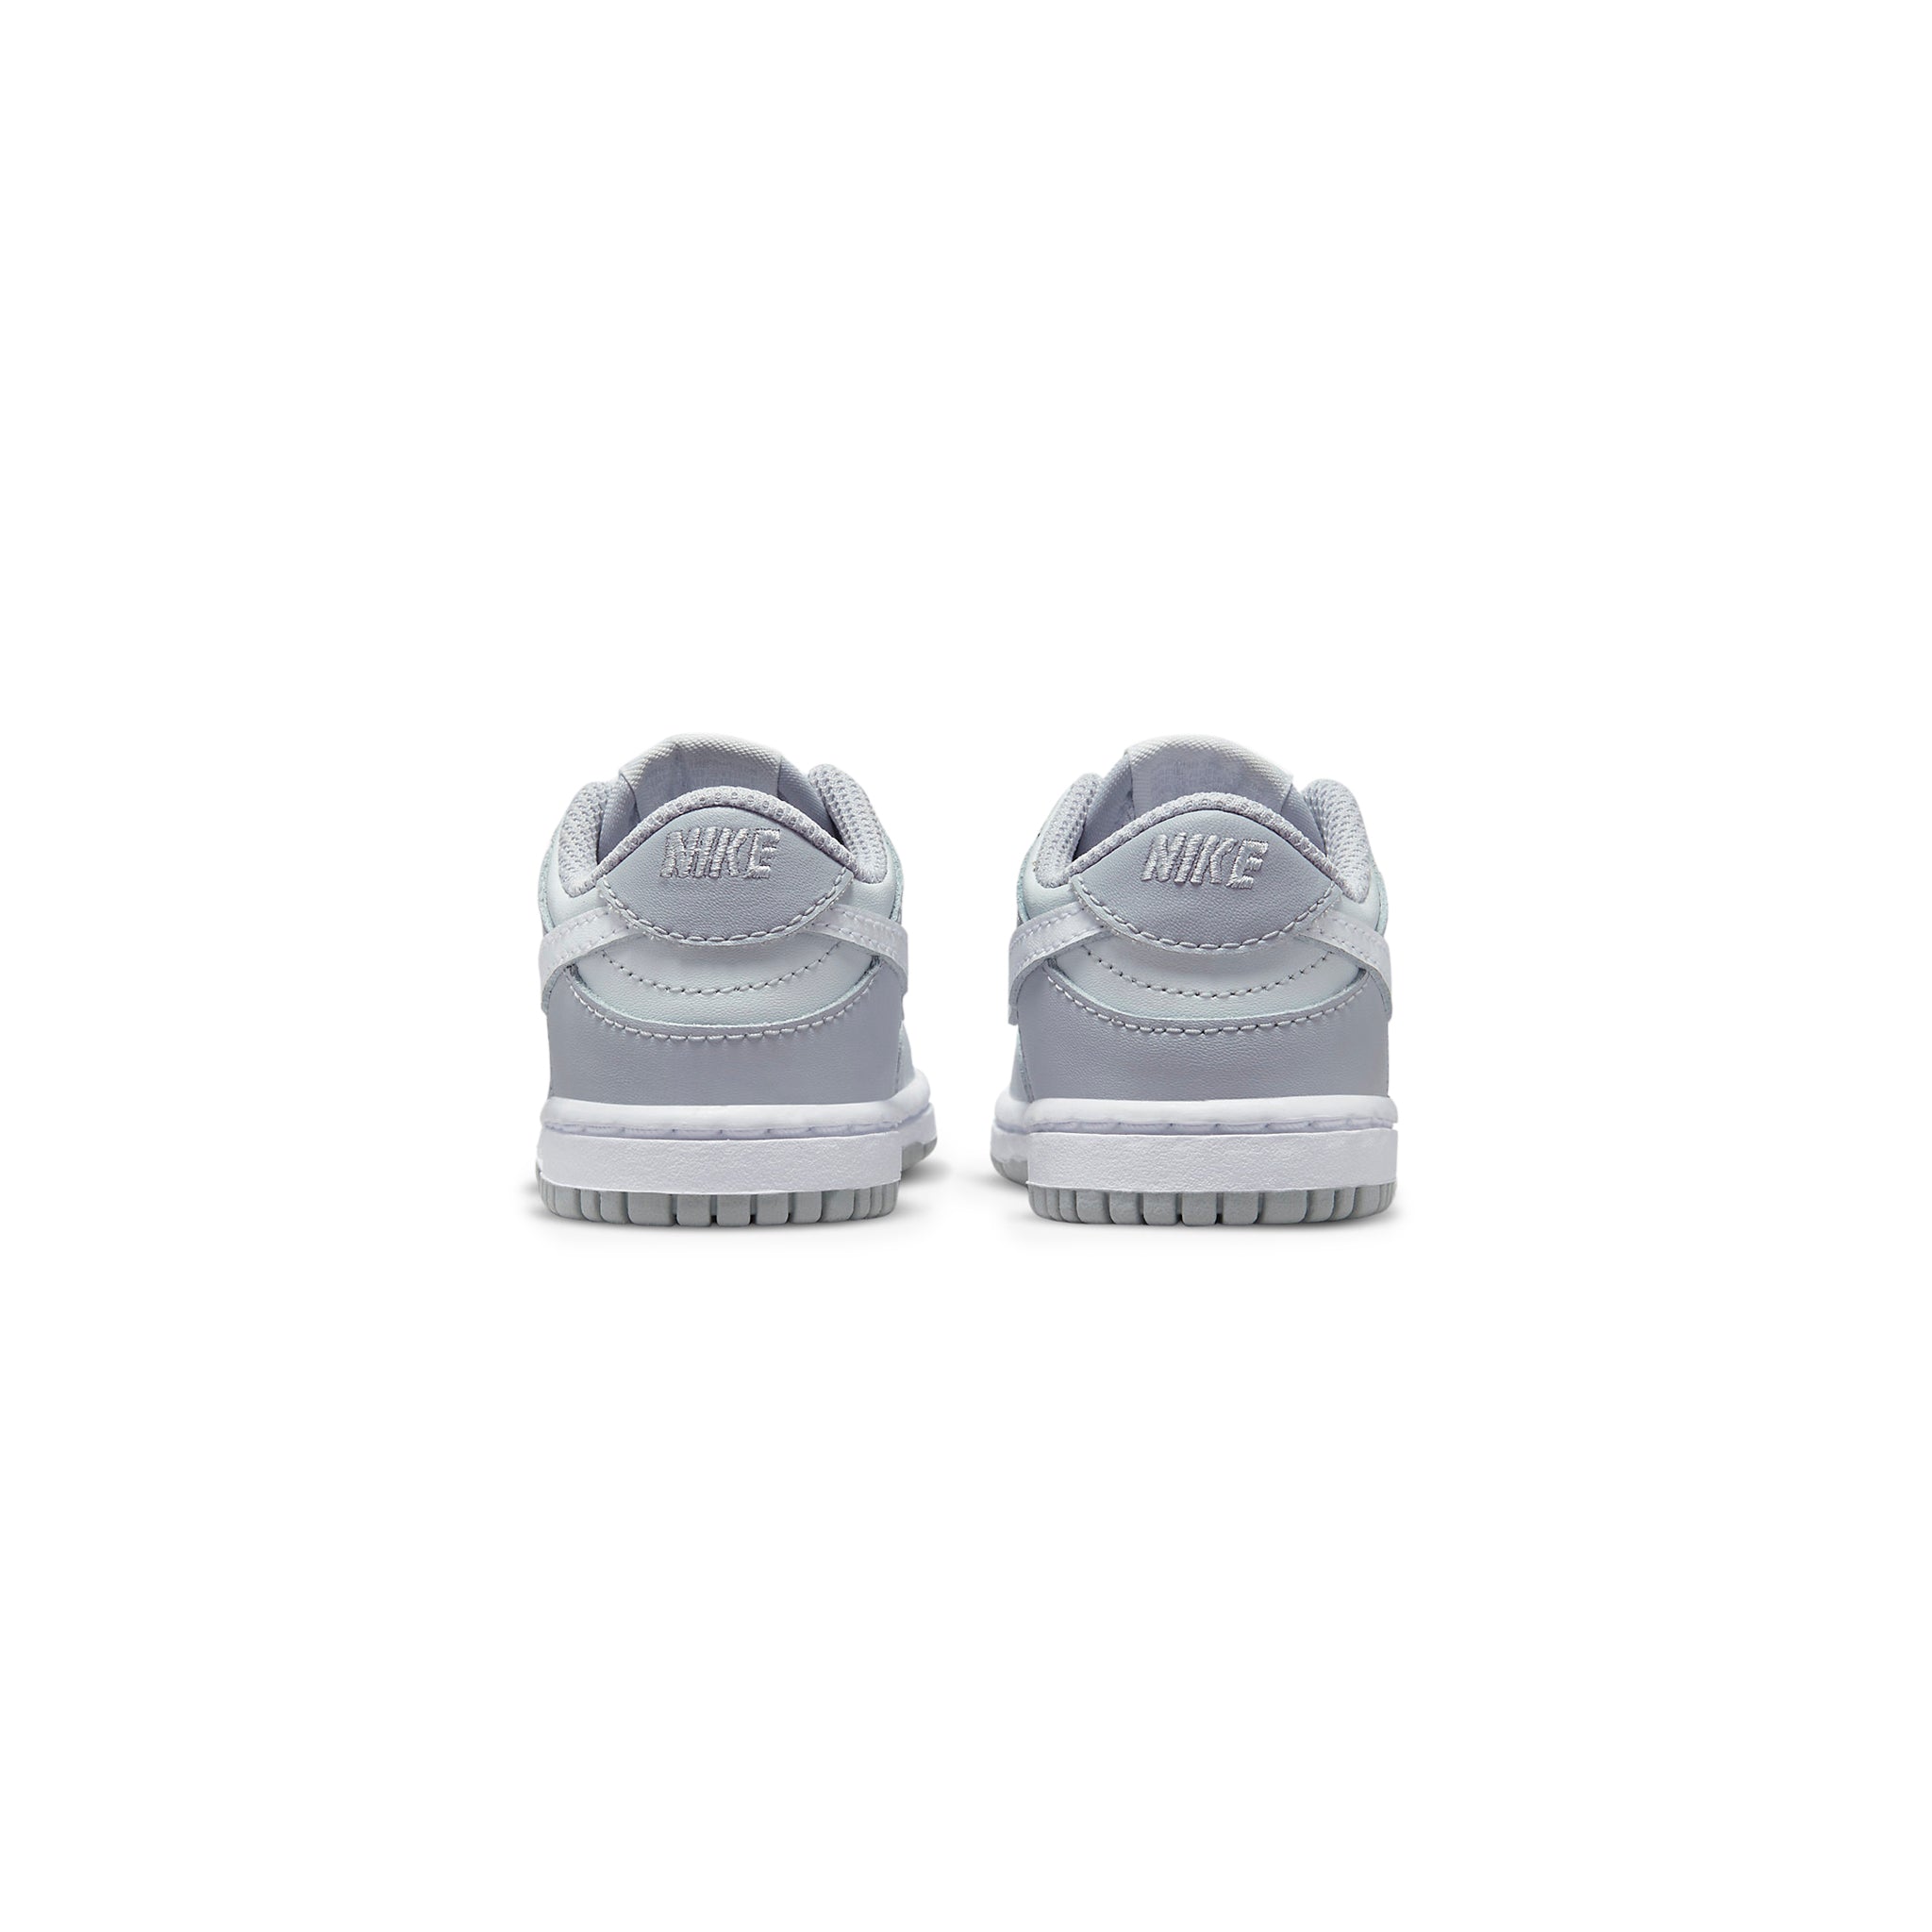 Back view of Nike Dunk Low Two-Toned Grey (TD) DH9761-001